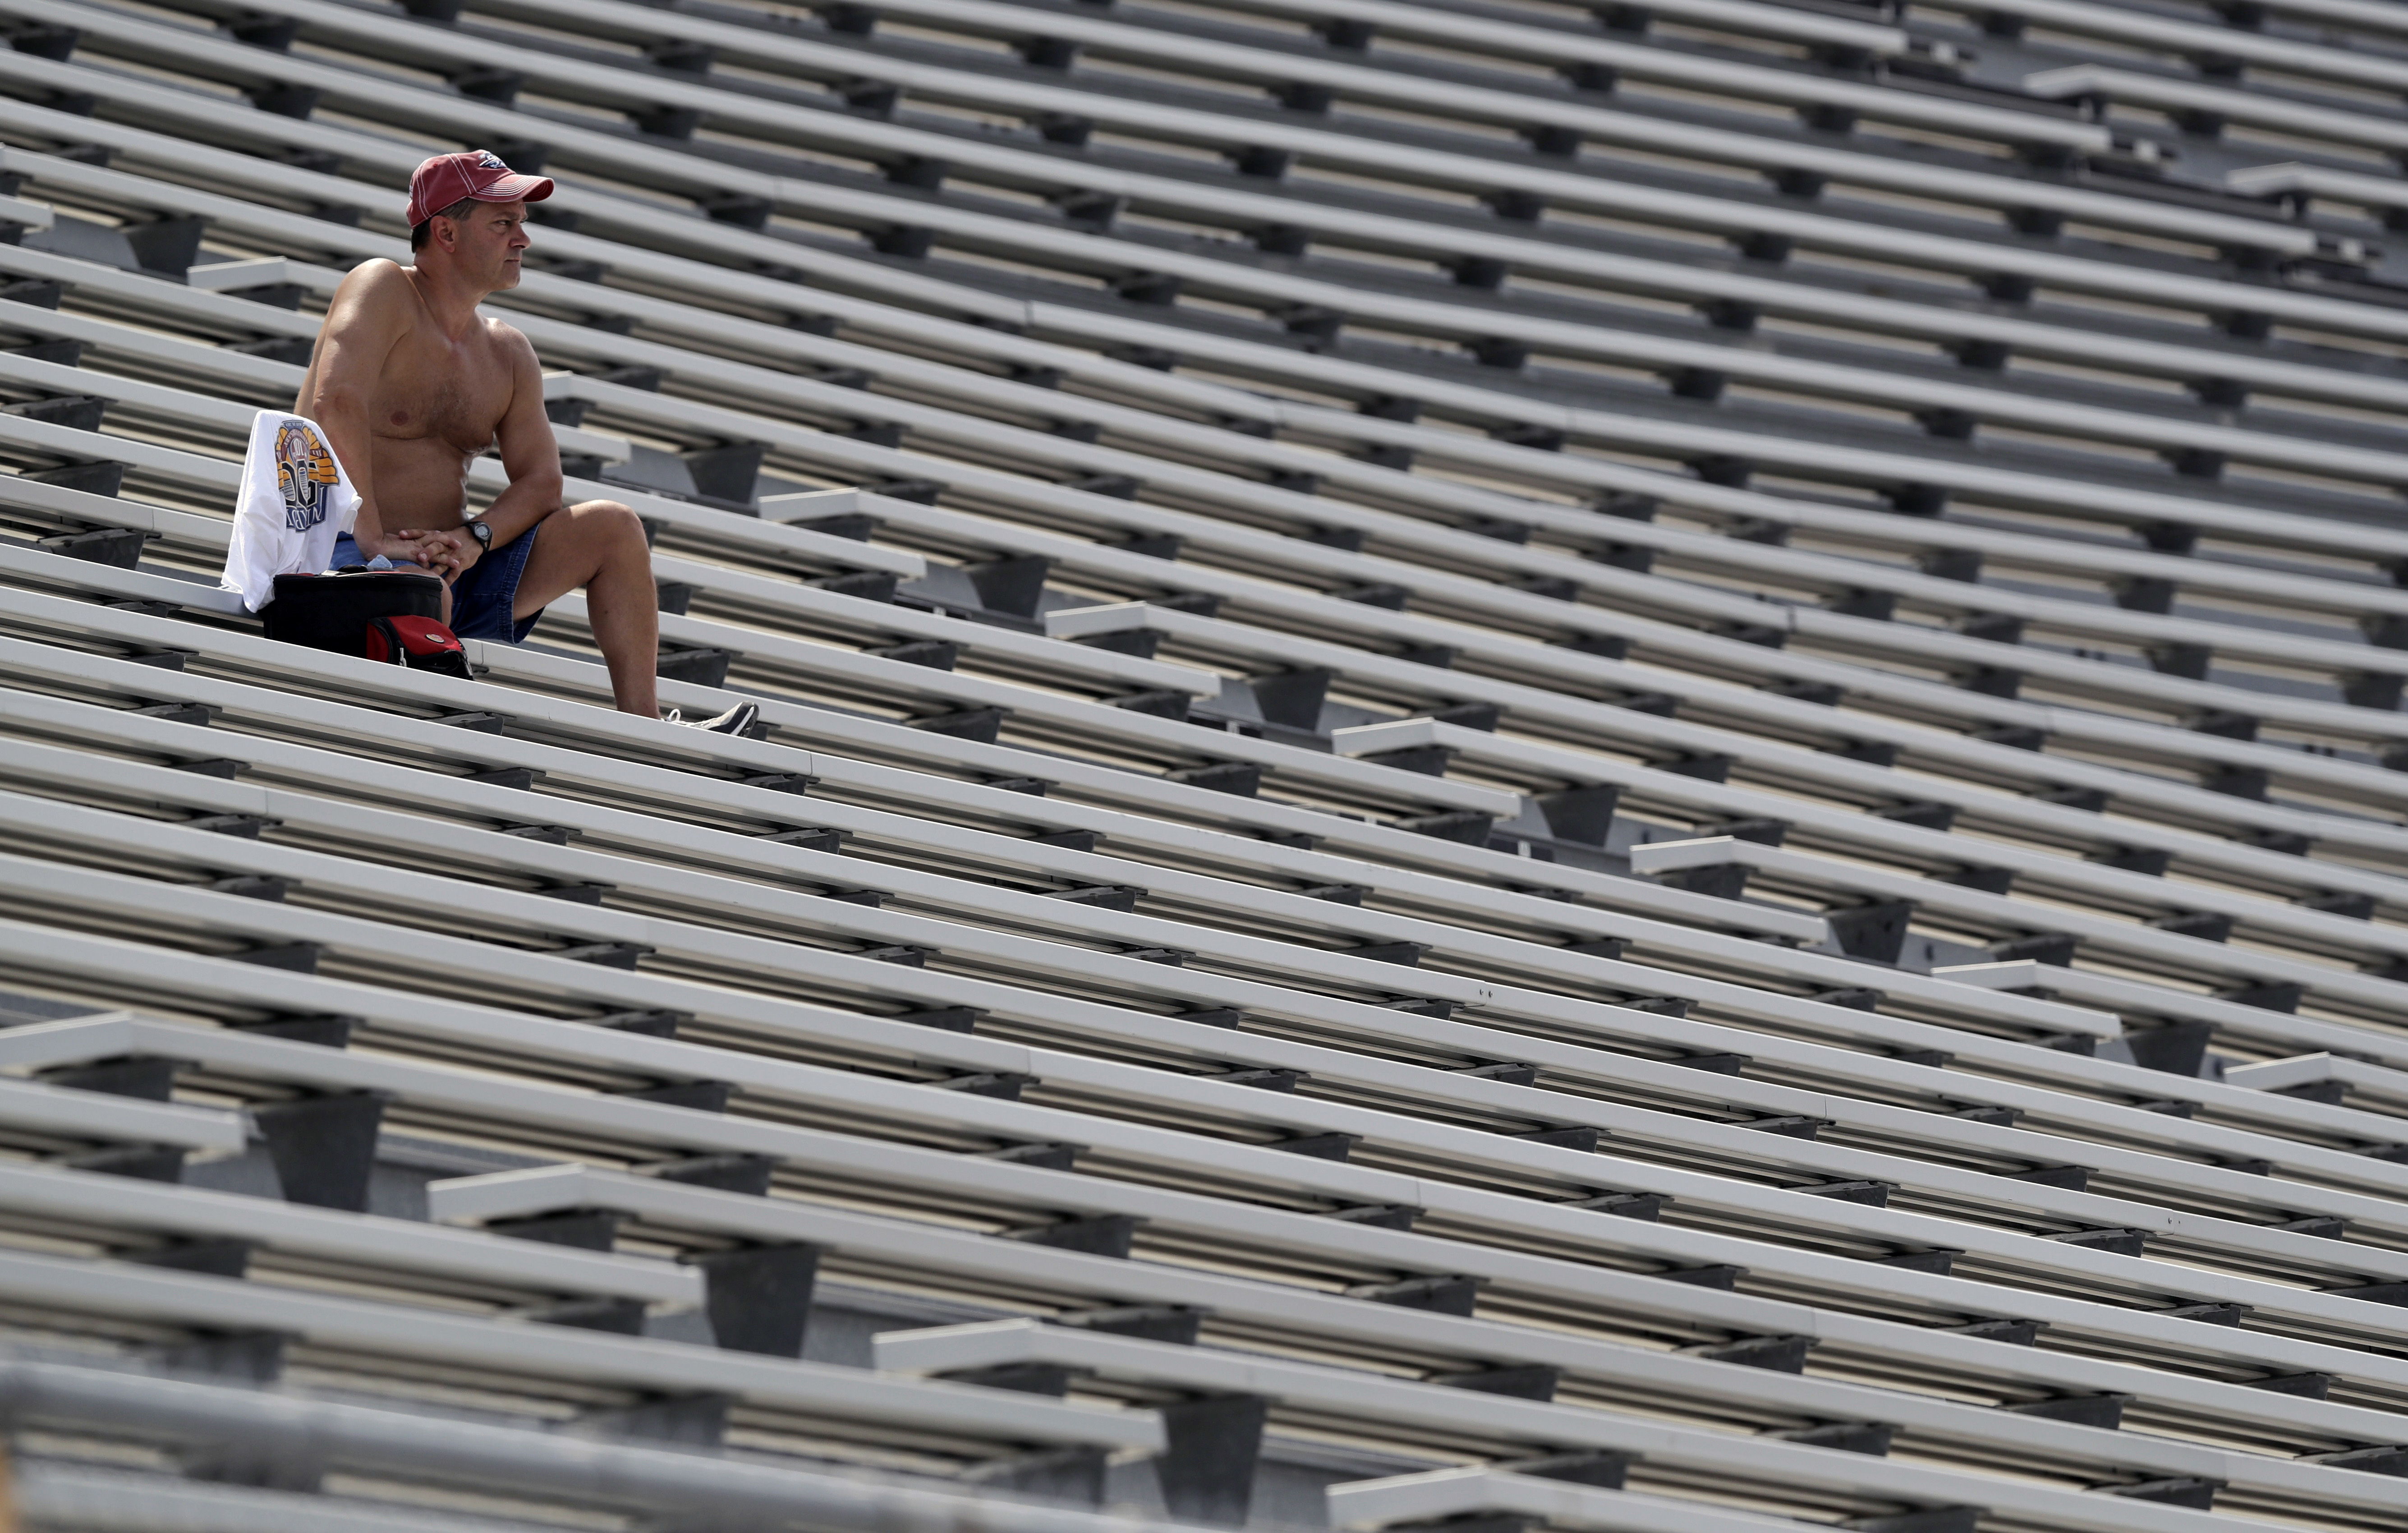 A fan watches from the stands as temperatures climb to the mid 90s with a heat index over 100 during the running of the Brickyard 400 NASCAR auto race at Indianapolis Motor Speedway in Indianapolis, Sunday, July 24, 2016. (AP Photo/Michael Conroy)